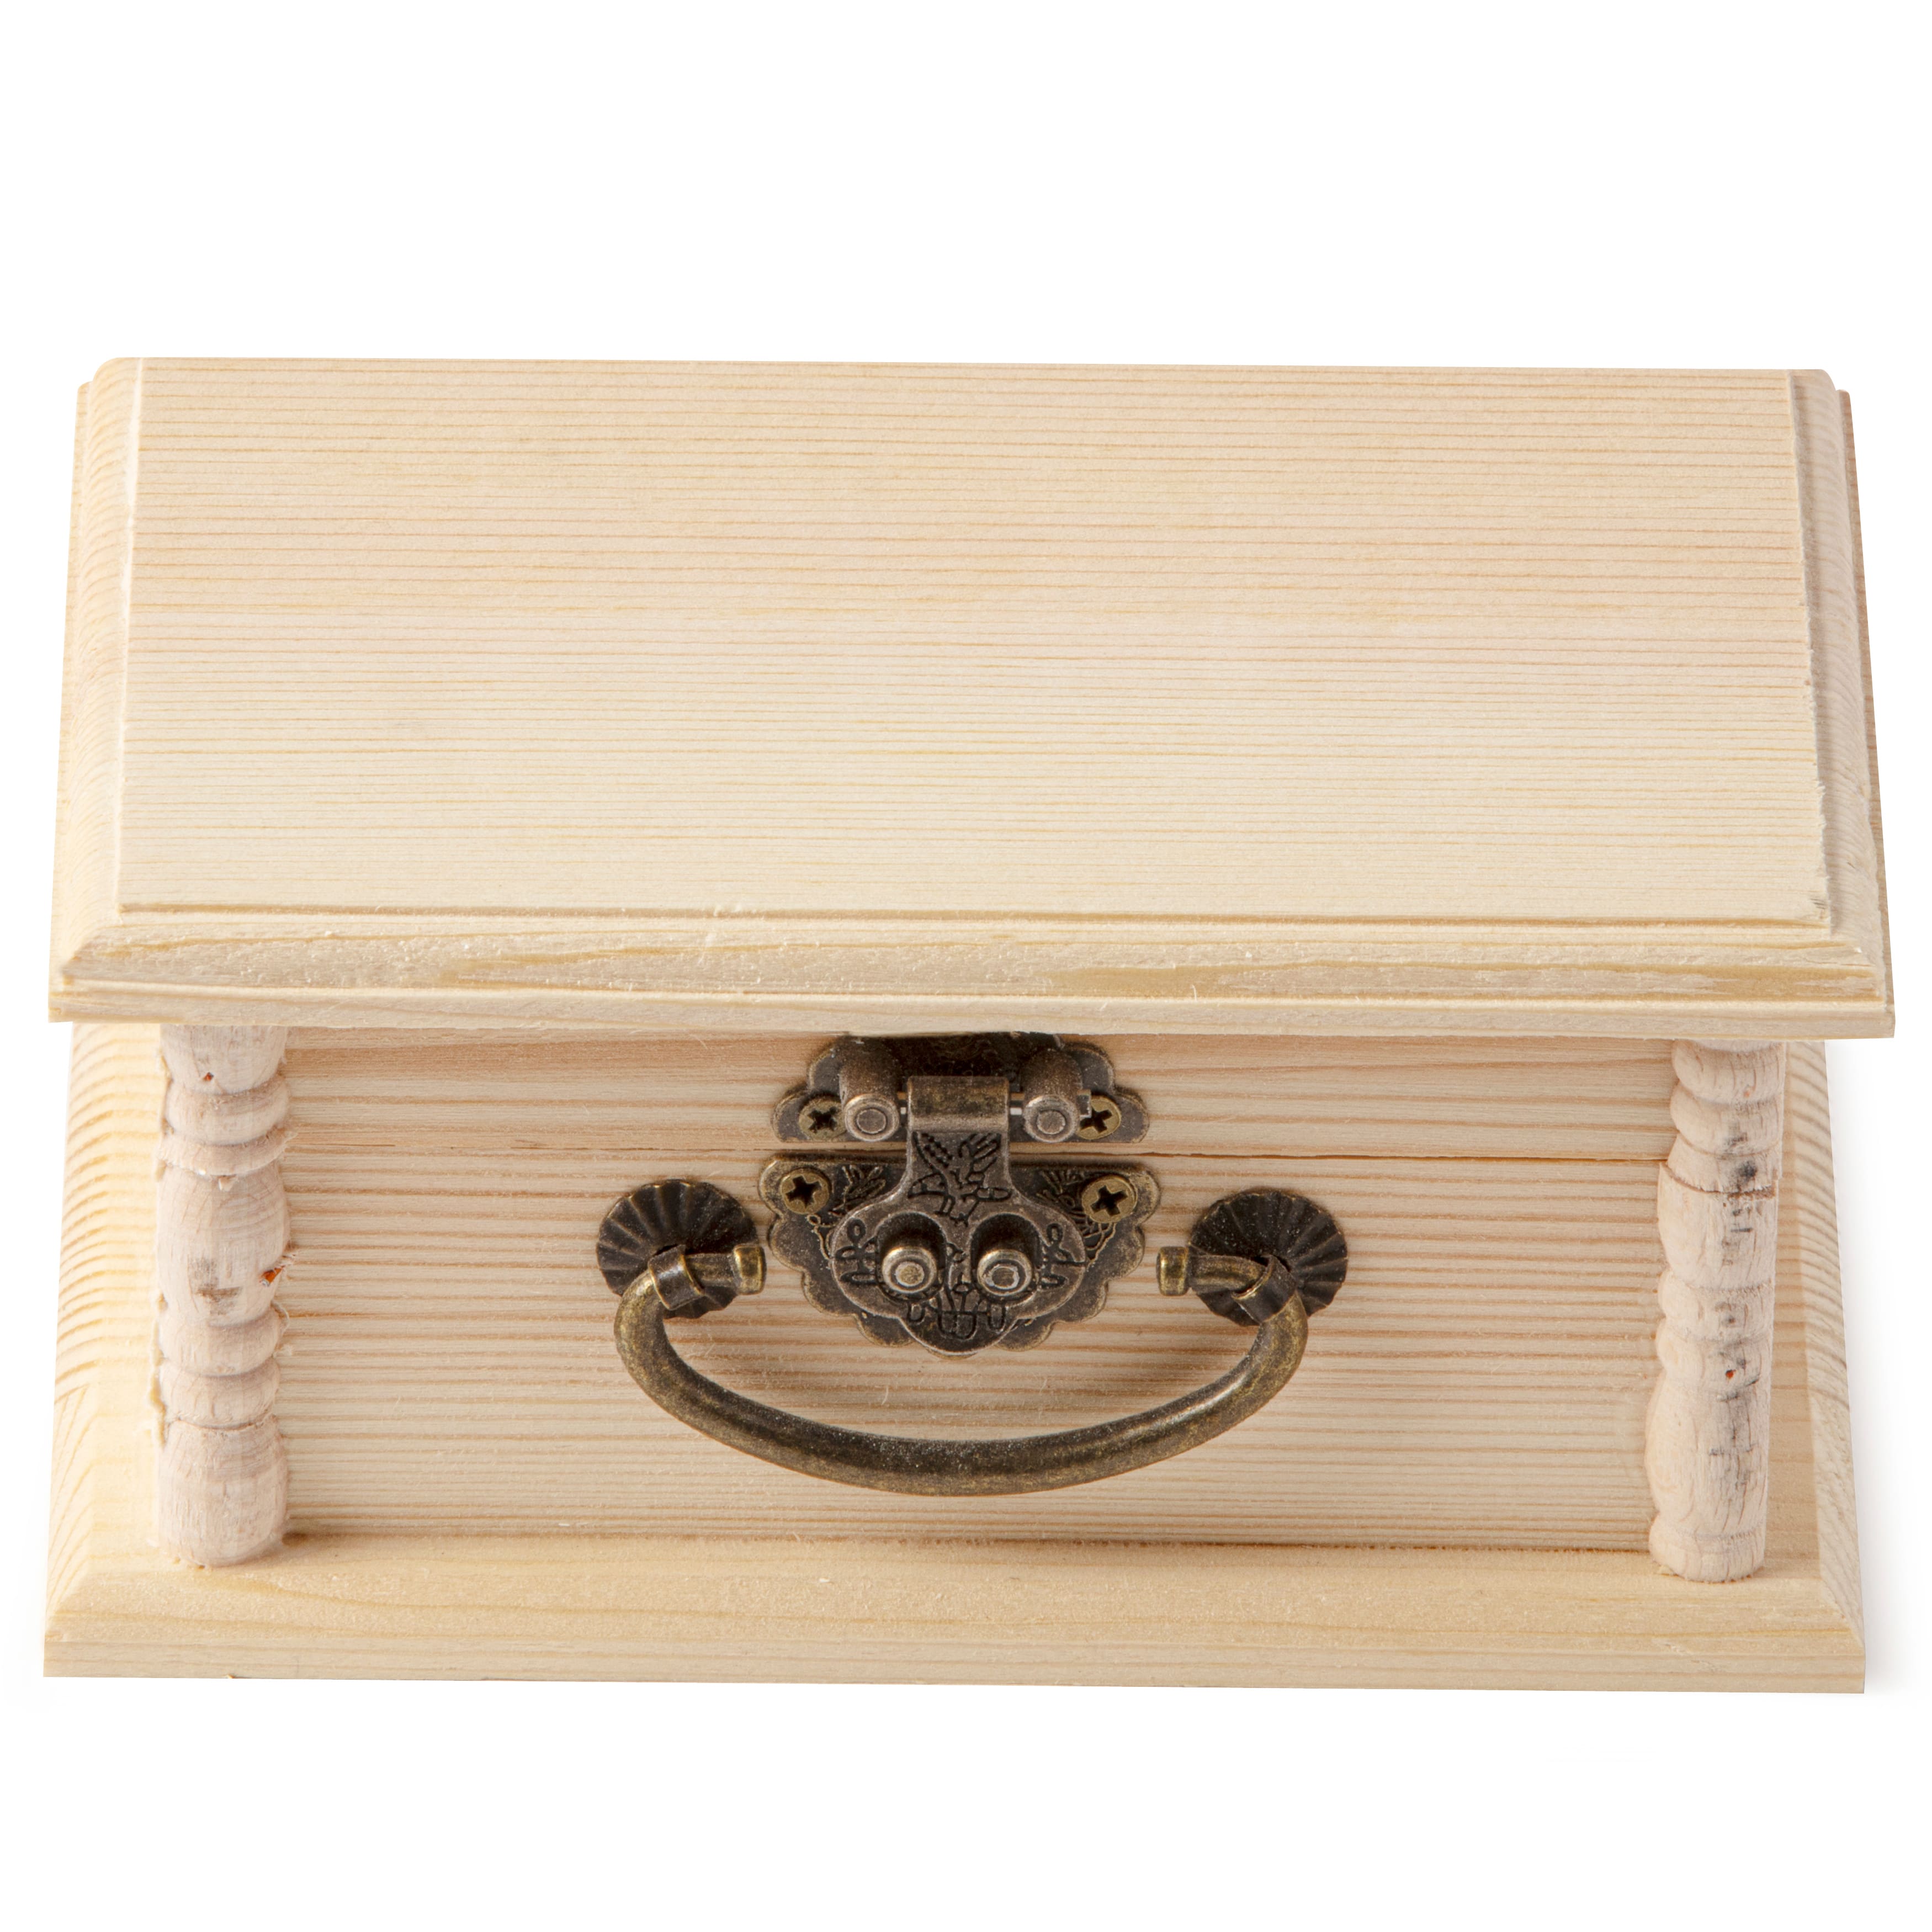 ArtMinds Wood Box with Handle - each